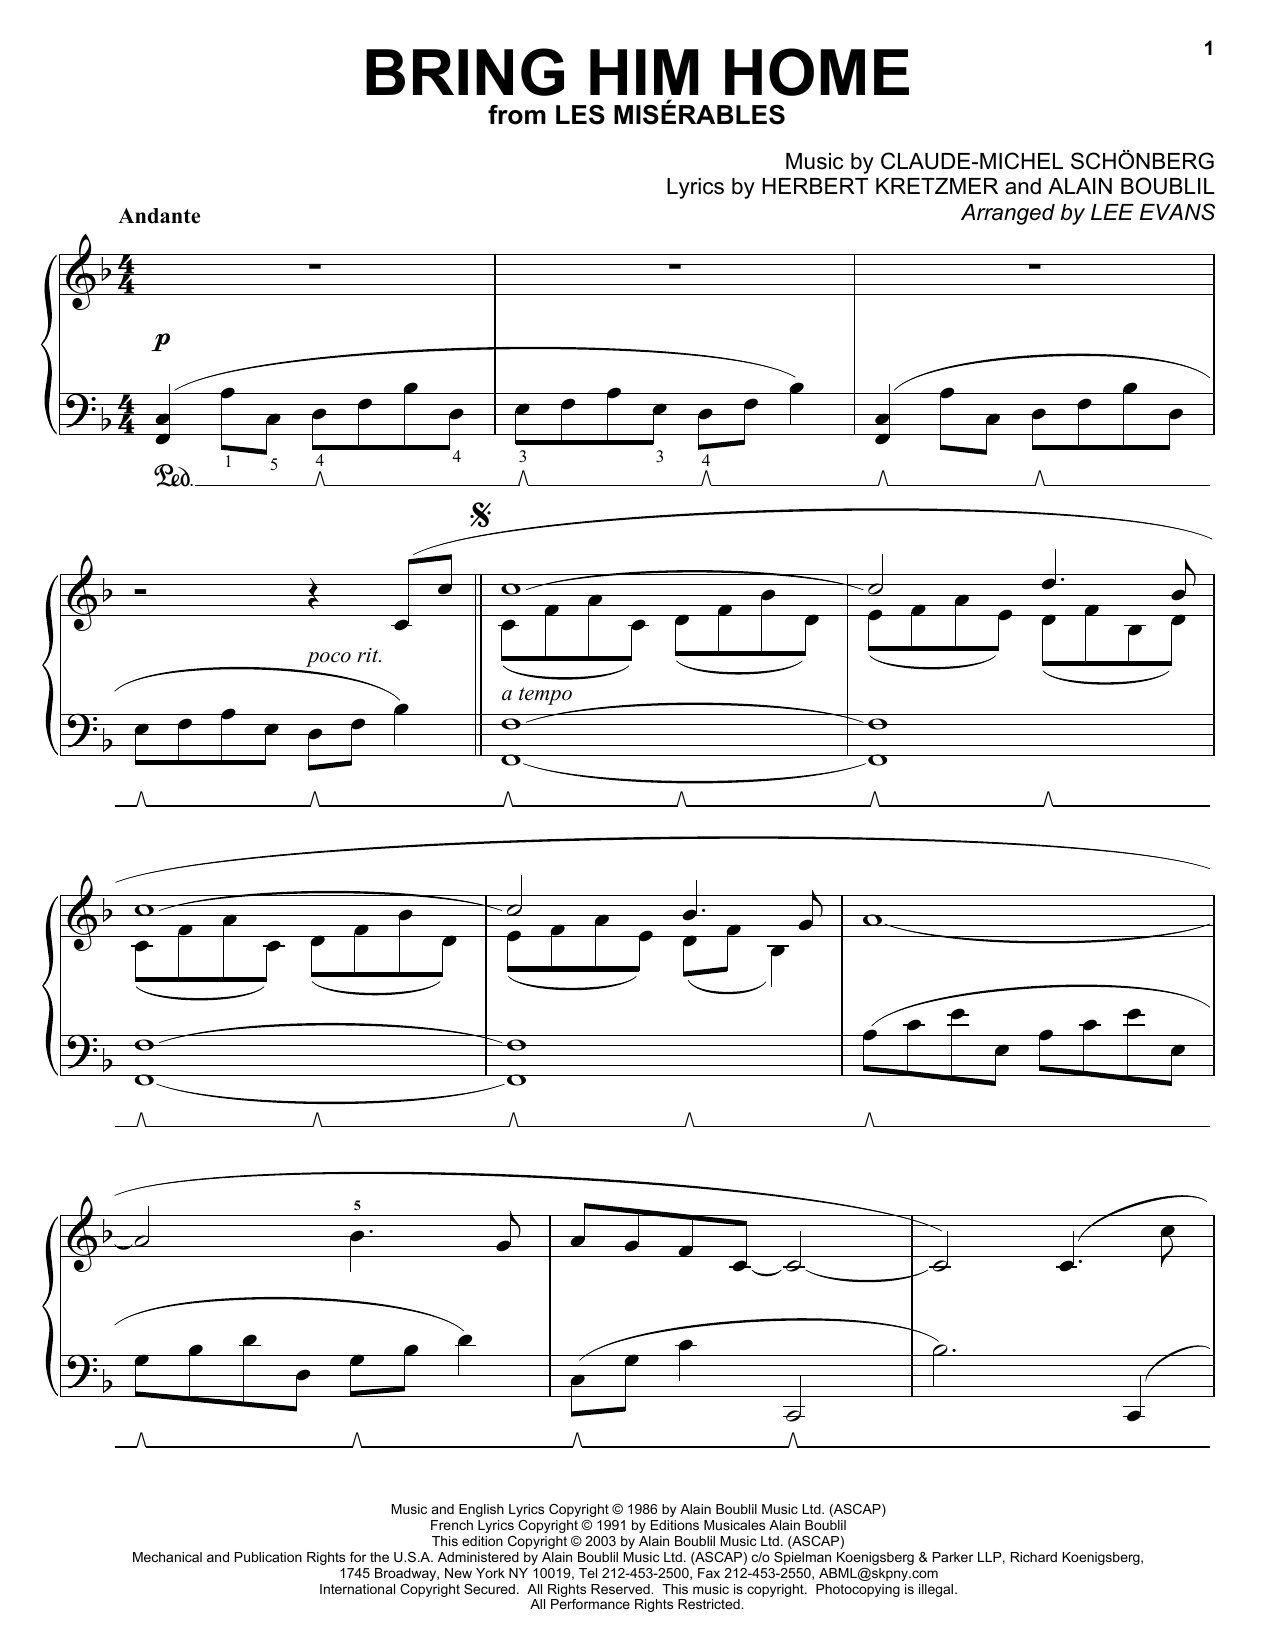 Download Alain Boublil Bring Him Home (from Les Miserables) sheet music and printable PDF score & Musicals music notes